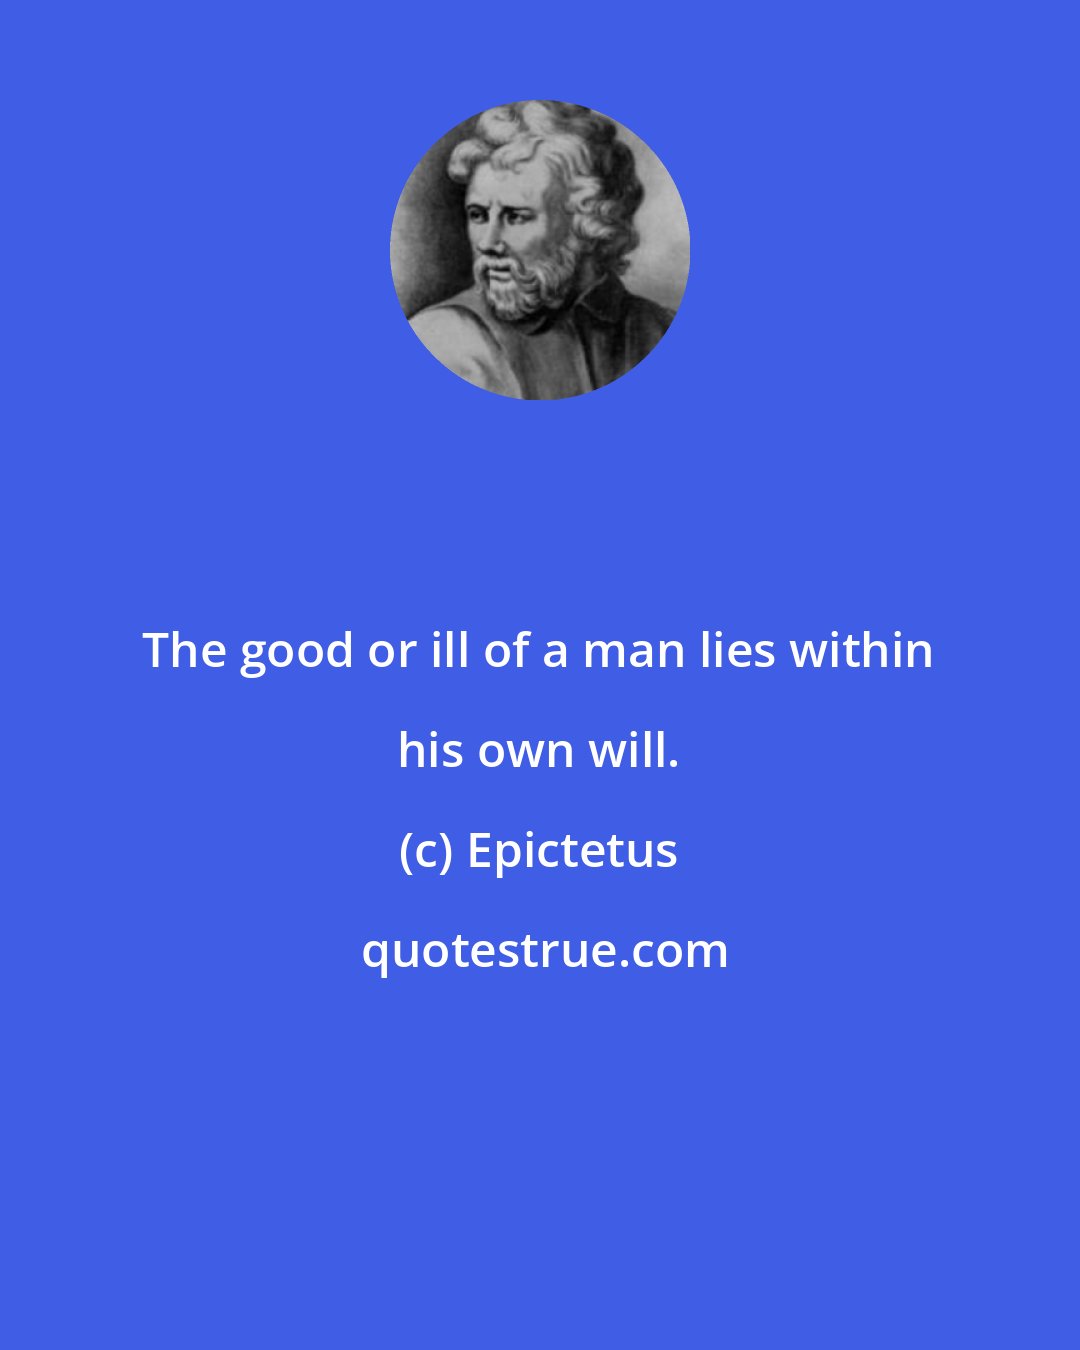 Epictetus: The good or ill of a man lies within his own will.